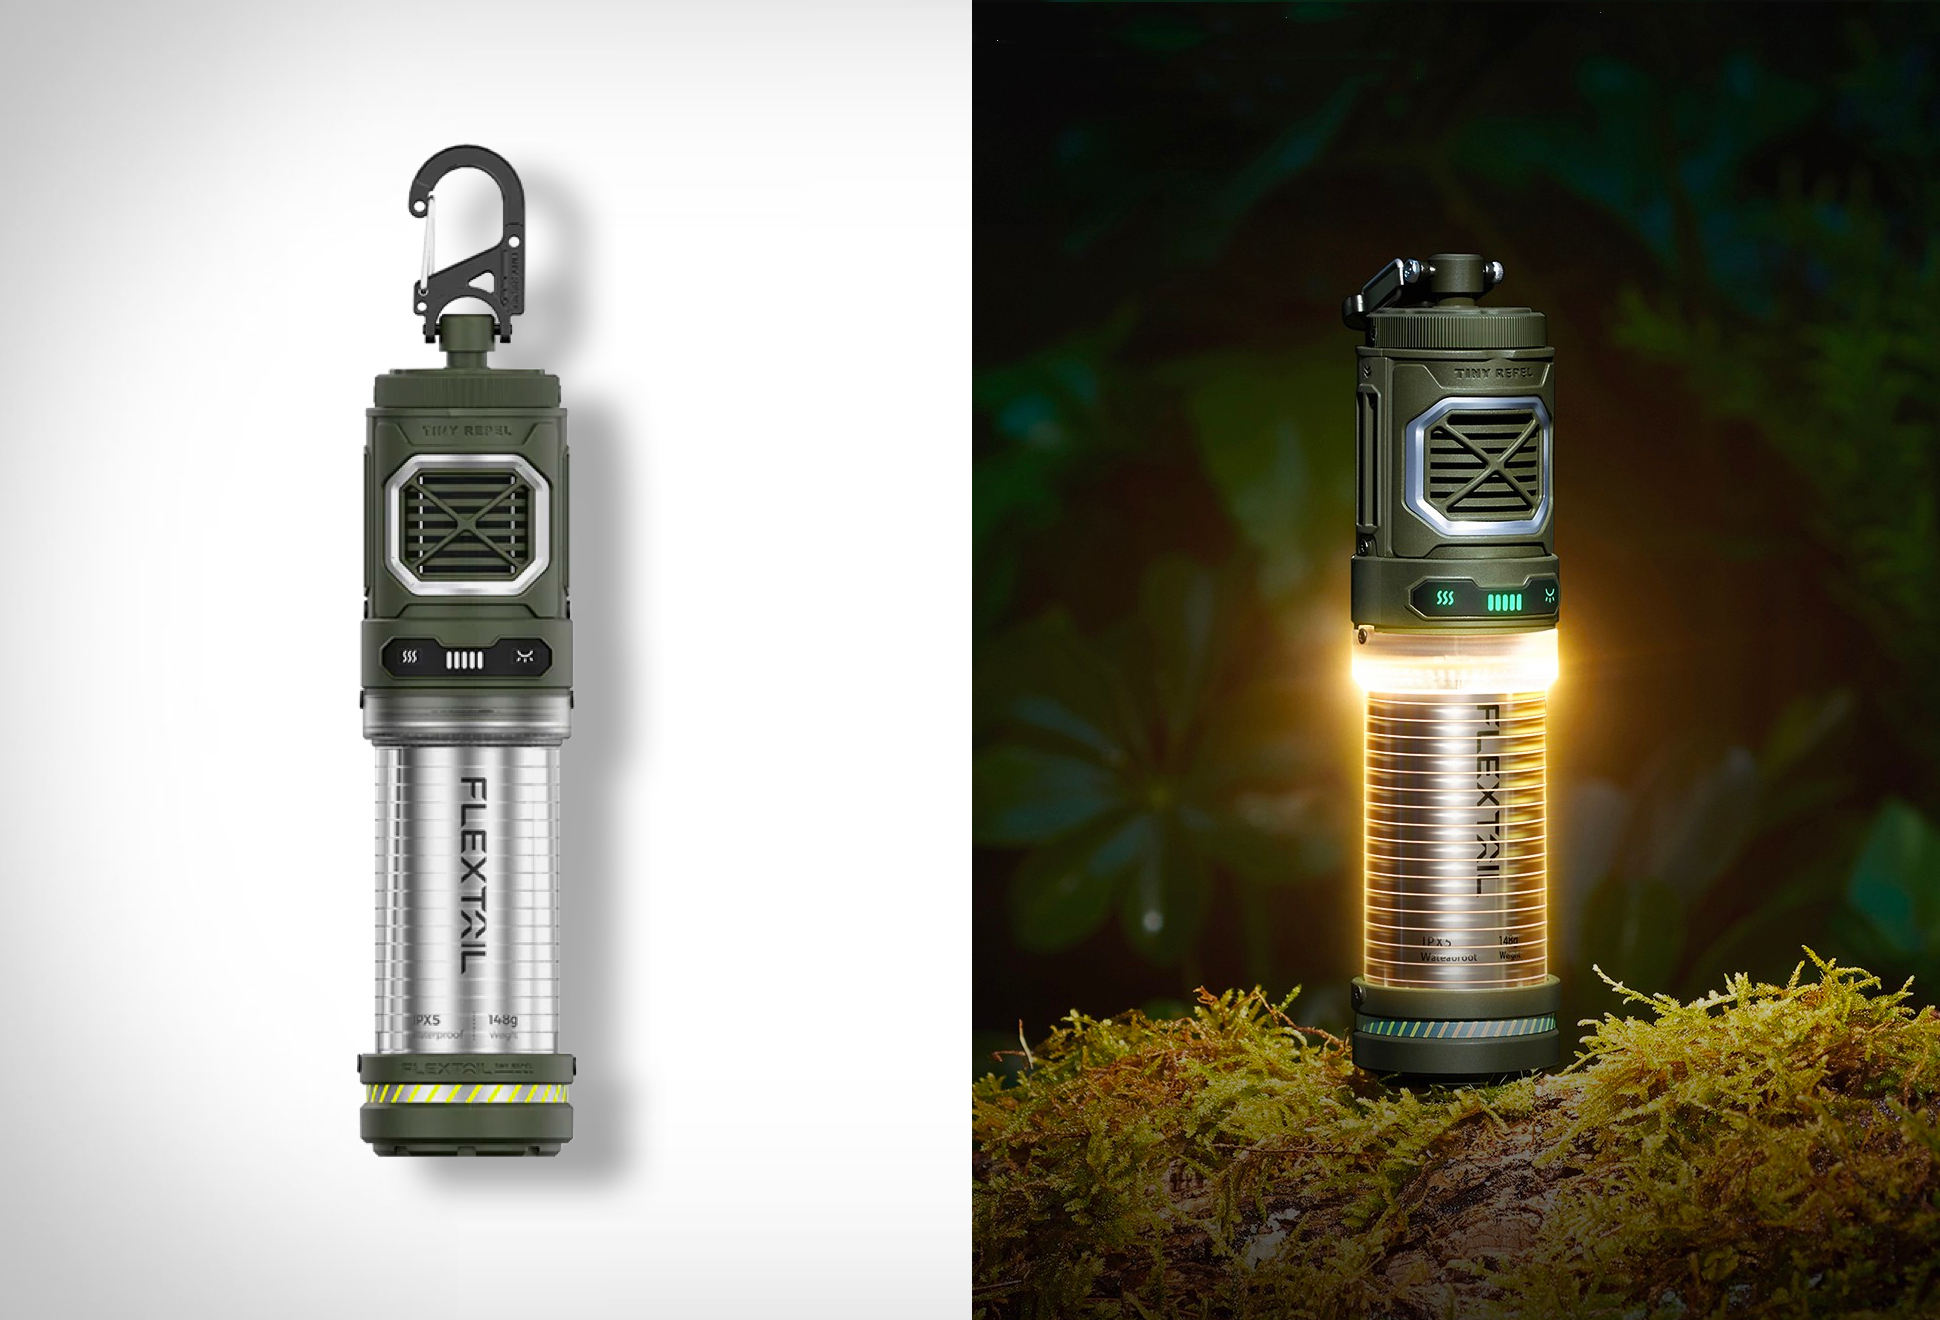 Flextail Mosquito Repellent & Camping Lantern | Image